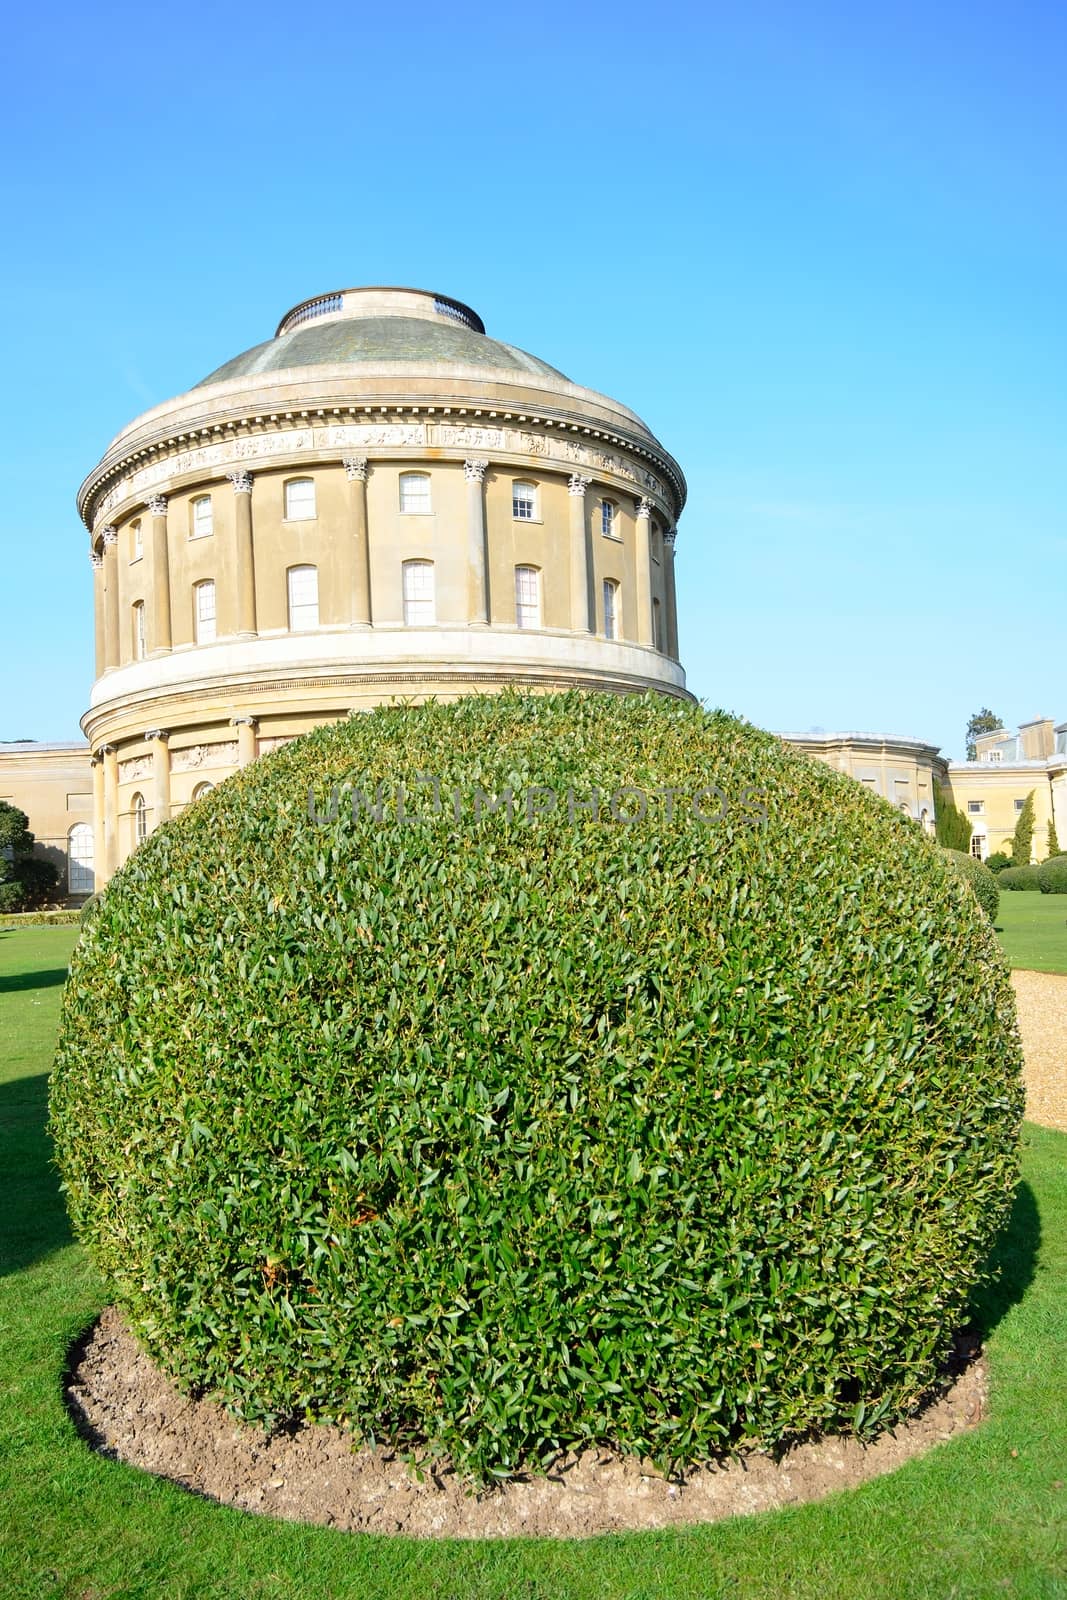 Rotunda with trimmed hedge